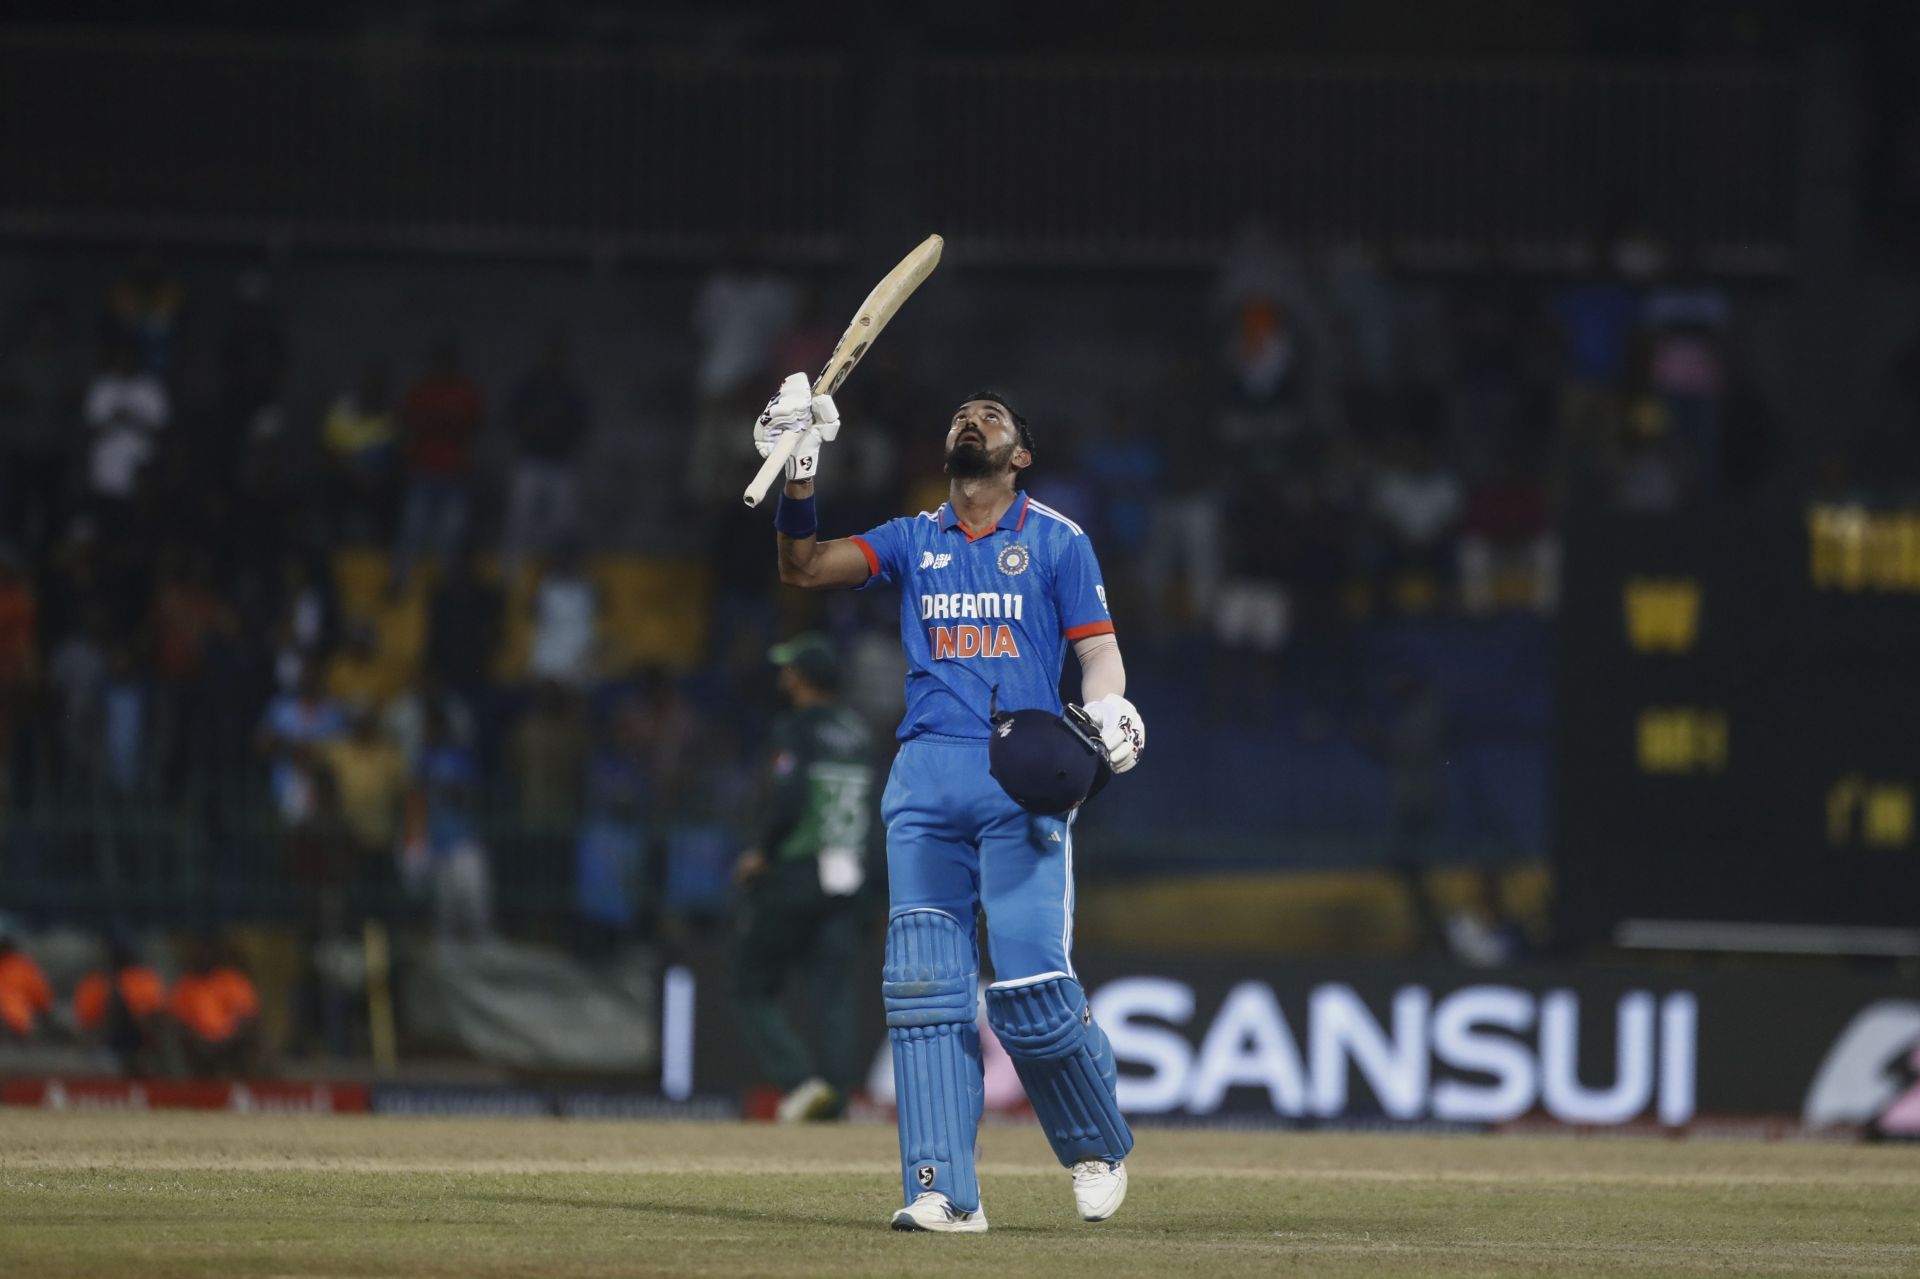 For KL Rahul, it was a fairy-tale comeback. He had been out of action after suffering a thigh injury during the Indian Premier League (IPL) 2023 in May. He was supposed to make a comeback during the group stage of the Asia Cup but picked up a niggle during rehabilitation. On Monday, though, he looked in sublime form, hitting 12 fours and 2 sixes in his unbeaten 111. (Pic: AP Photo)